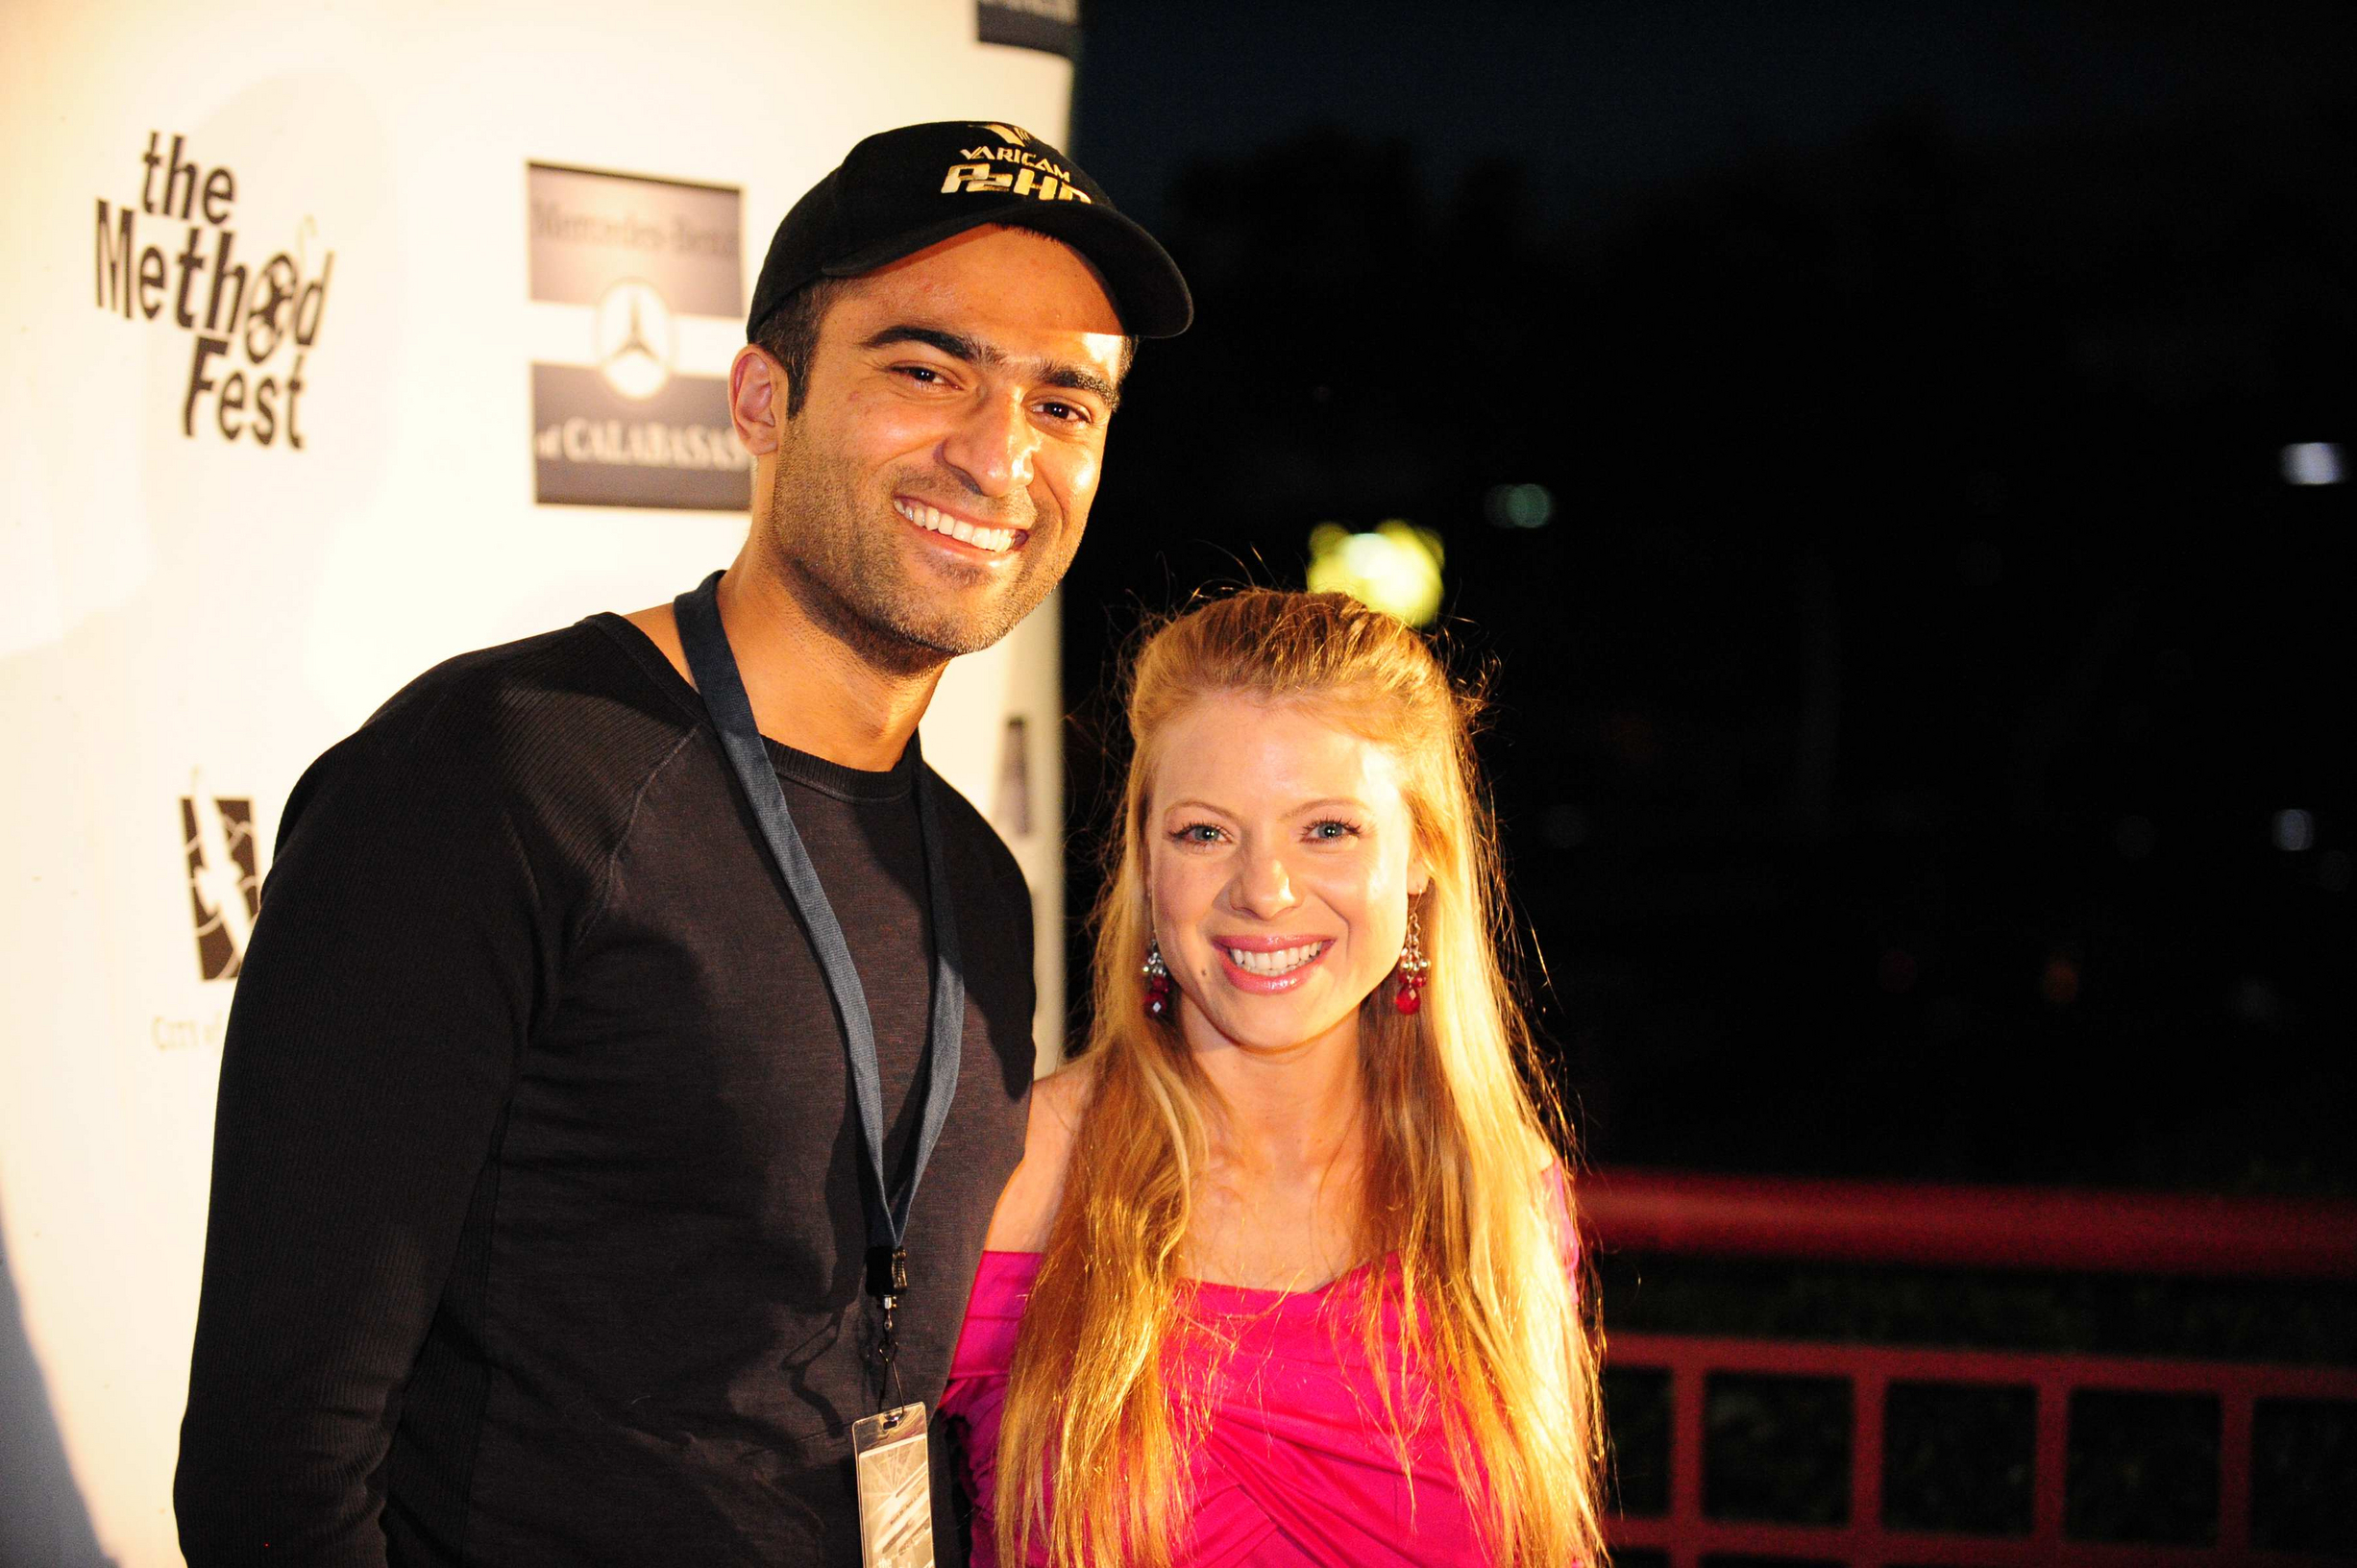 Warren Pereira and Allison Mccurdy at the March 2009 Method Fest in Calabasas, CA. Pereira's 